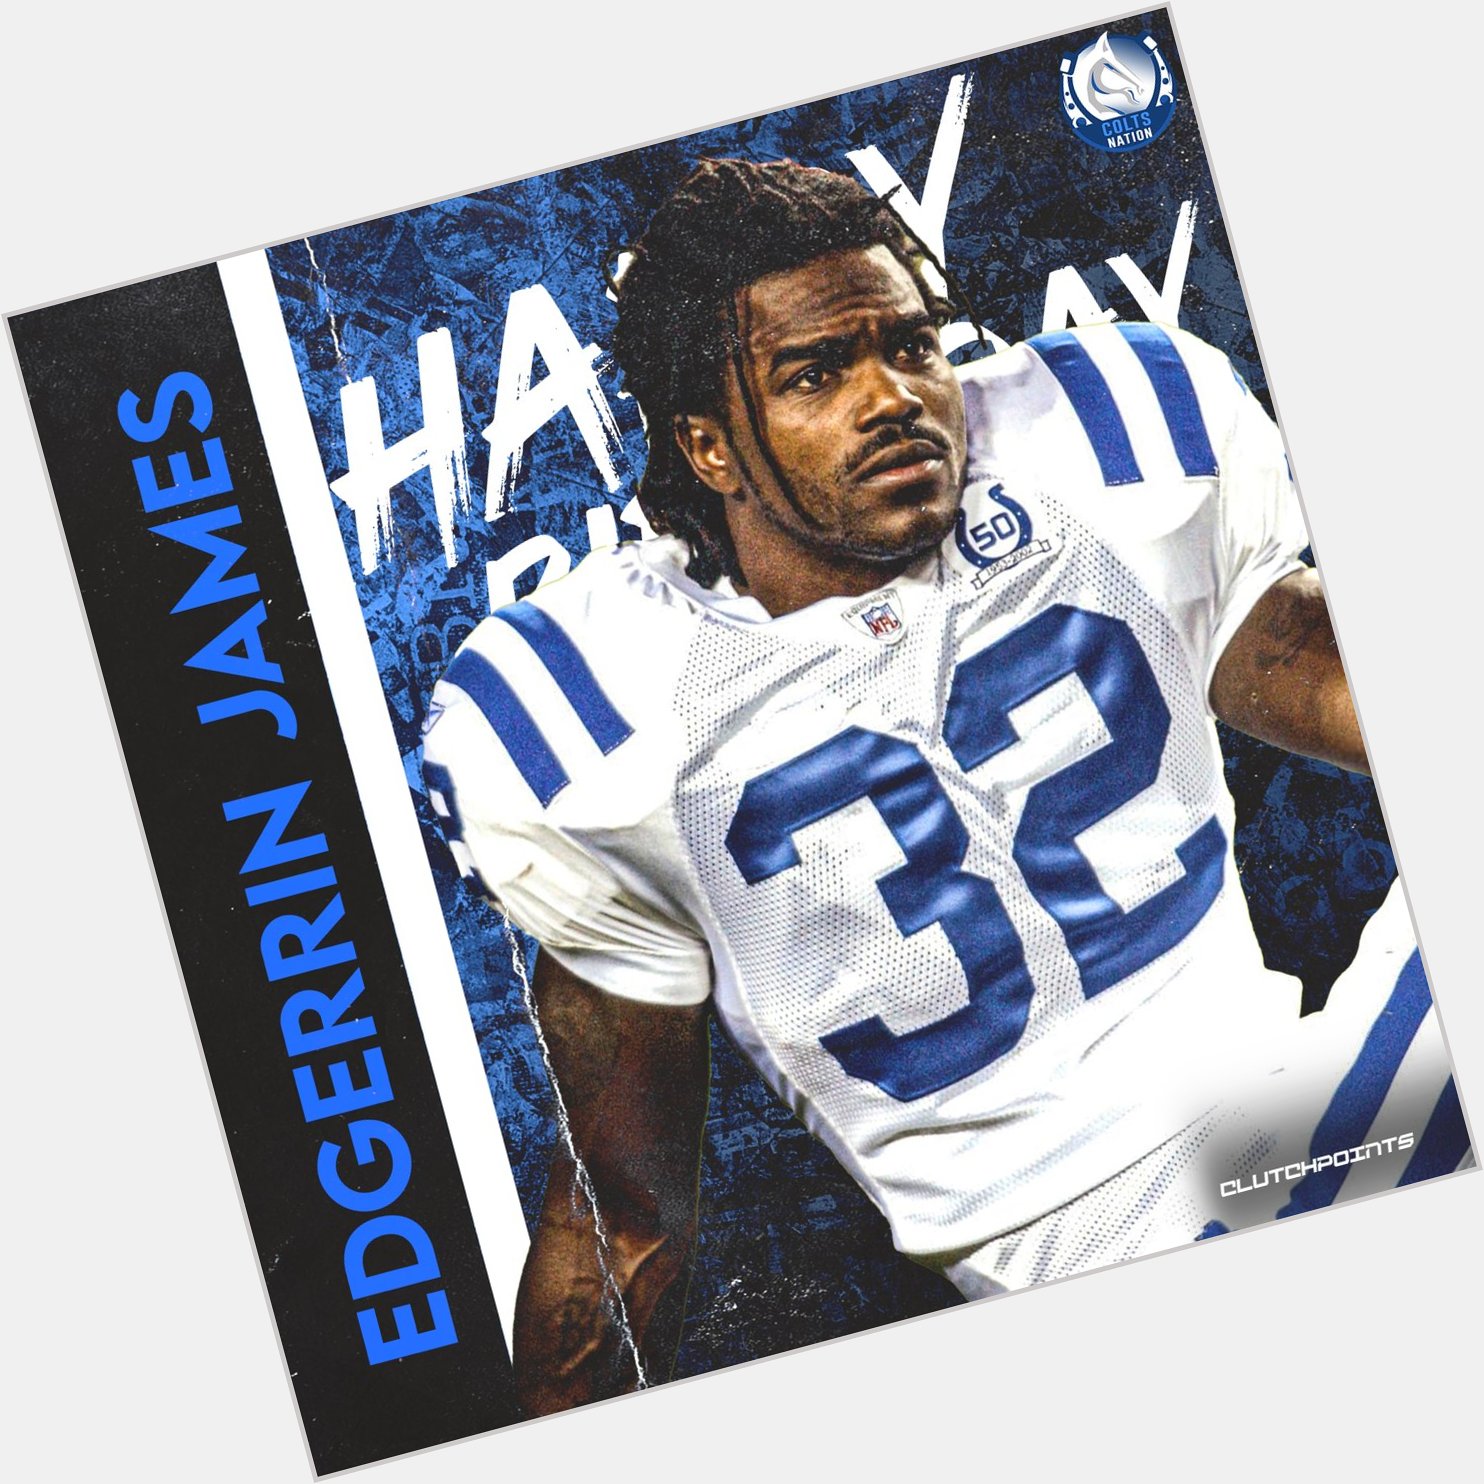 Colts Nation, join us in wishing Hall of Famer, Edgerrin James, a happy 44th birthday 